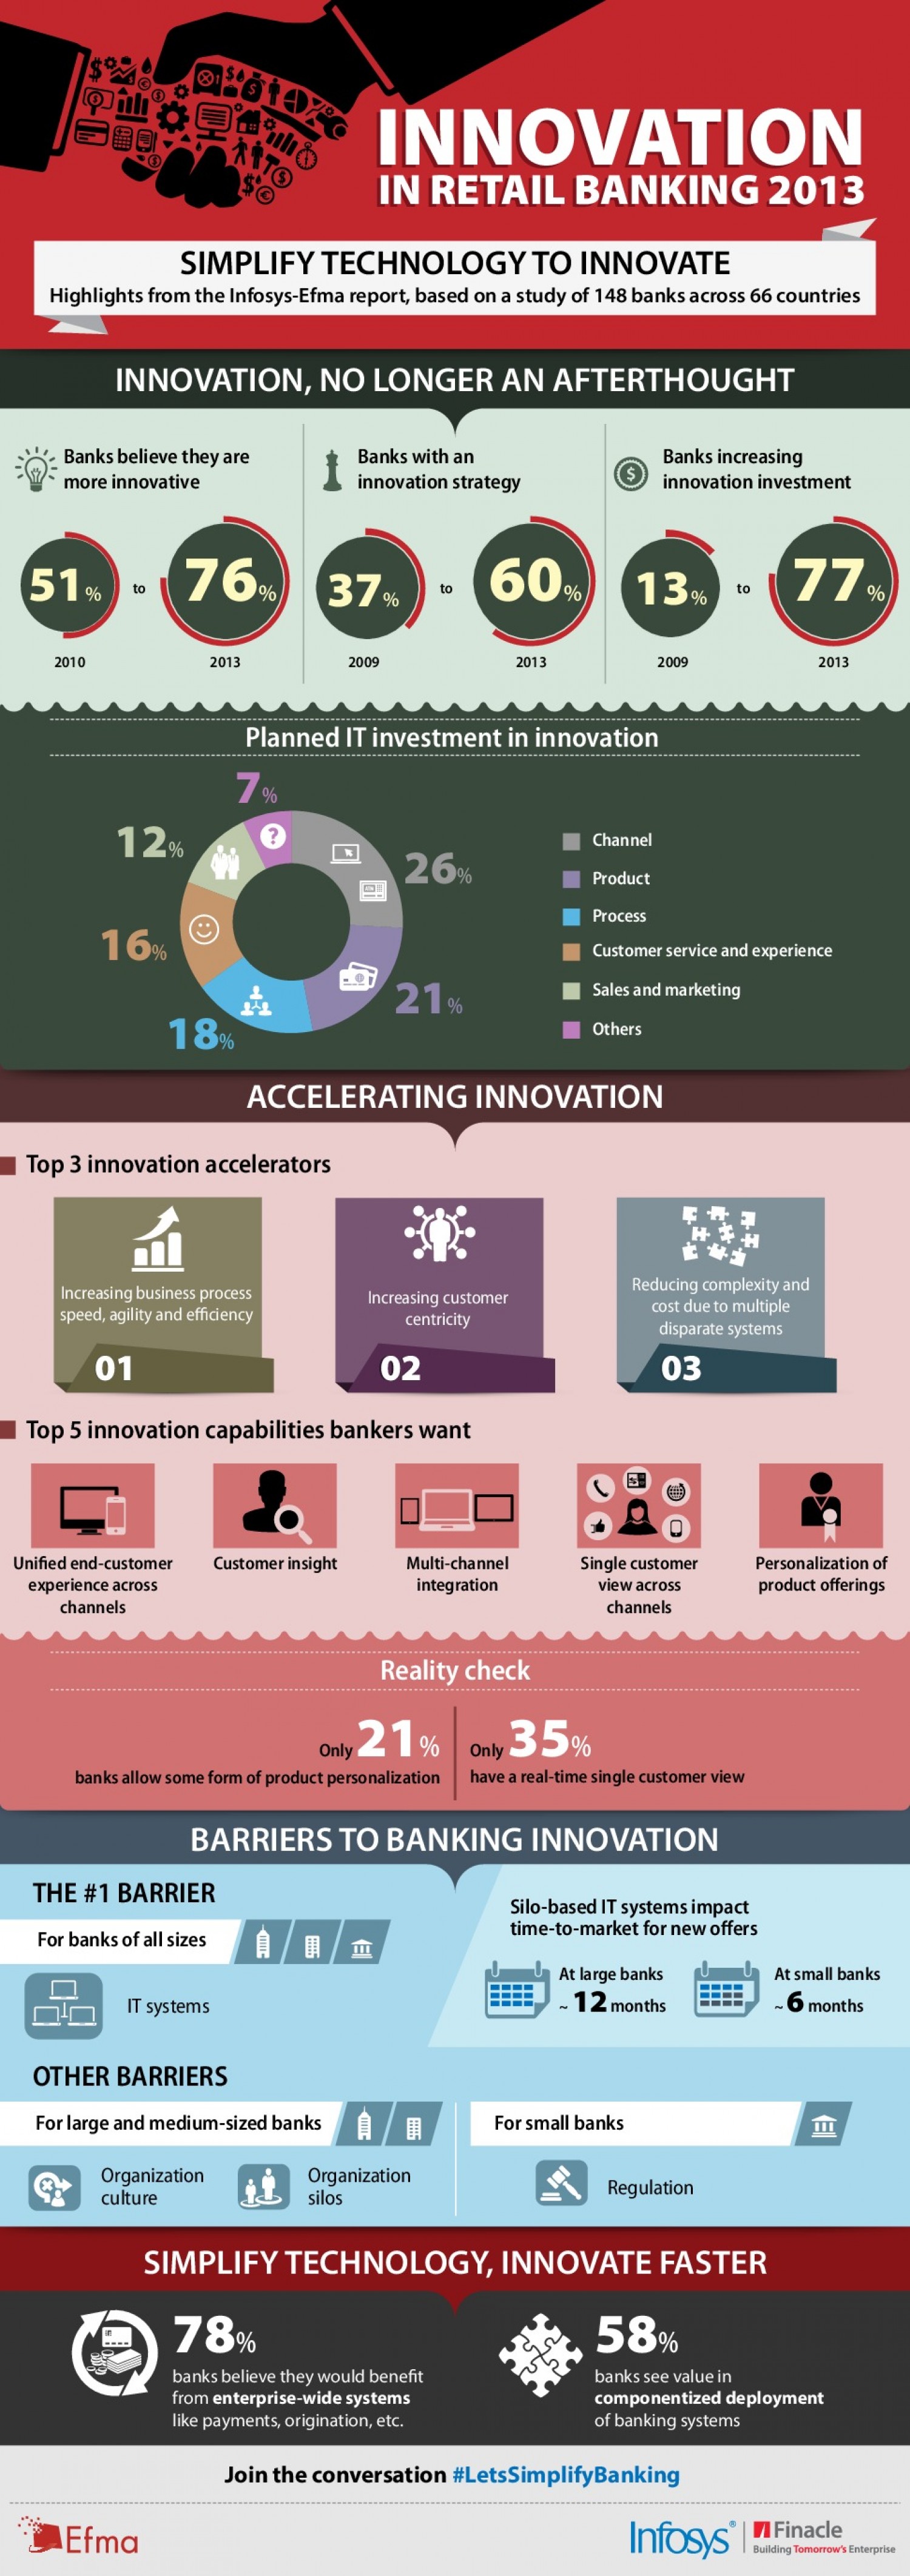 Innovation in retail banking 2013